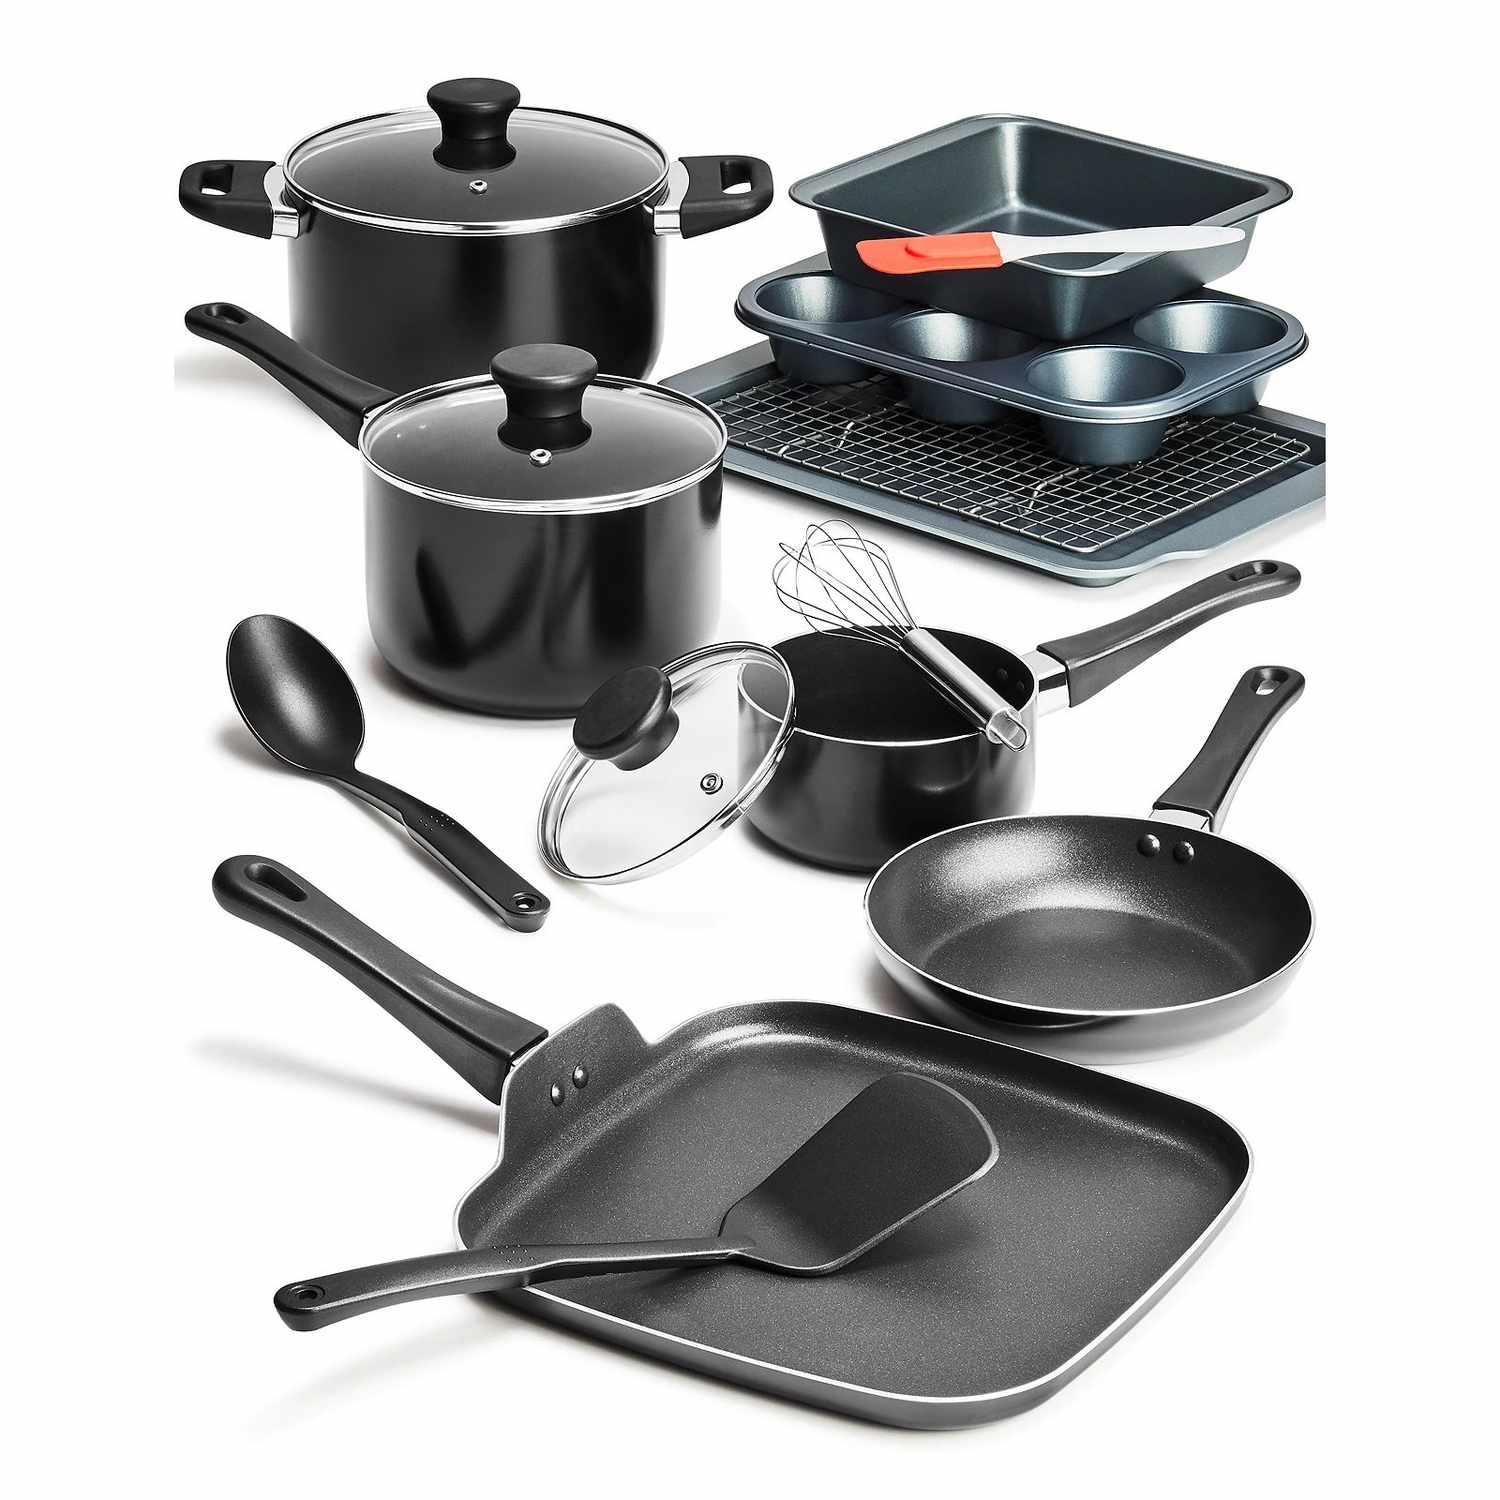 Tools of the Trade 16-Pc. Cookware & Bakeware Set